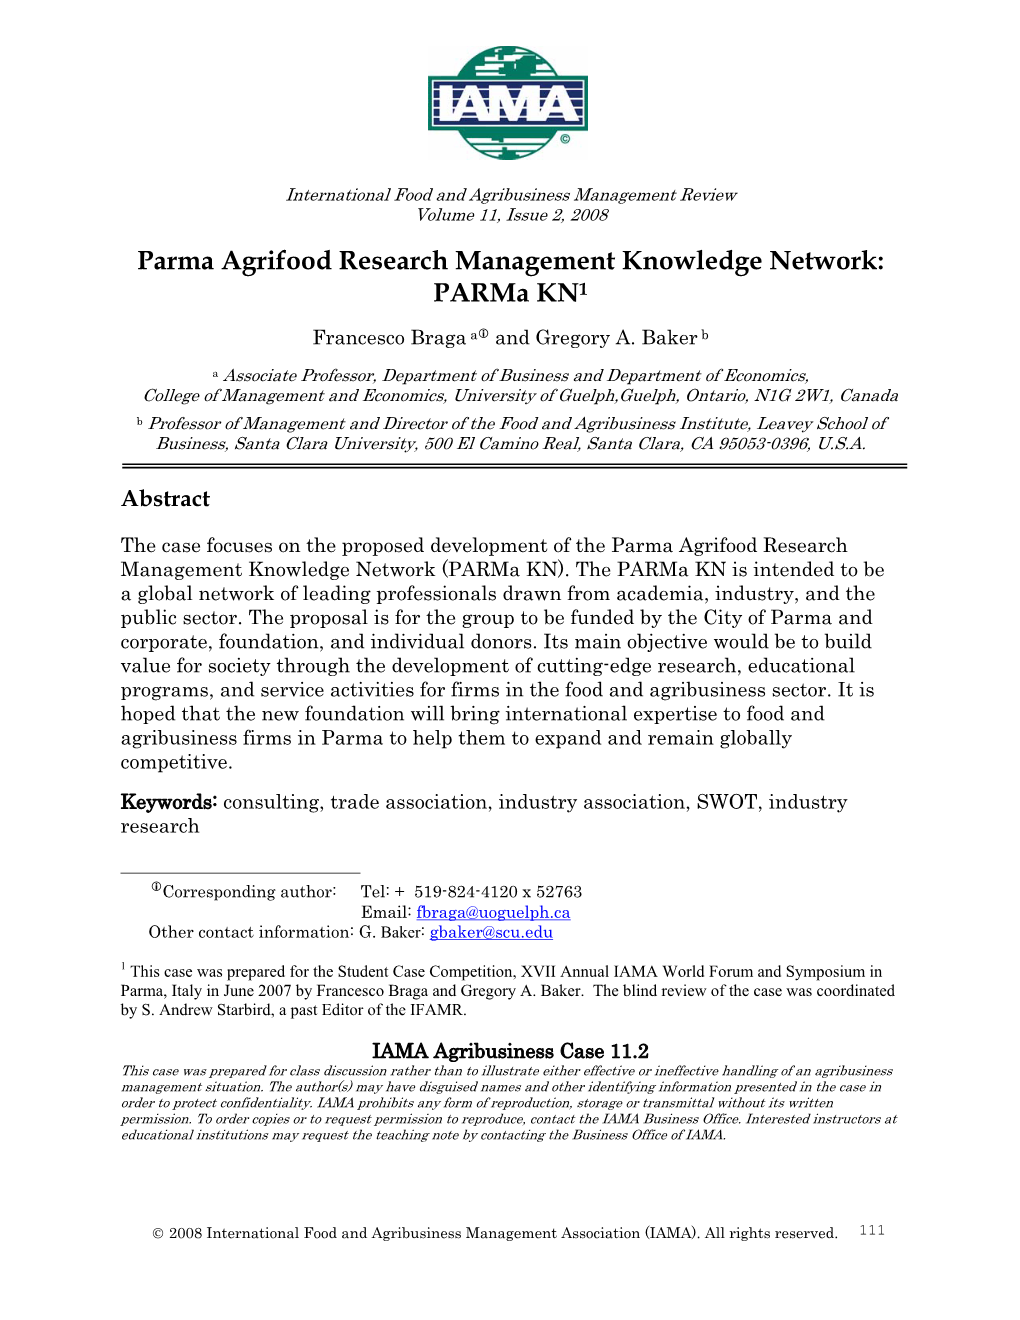 Parma Agrifood Research Management Knowledge Network: Parma KN1